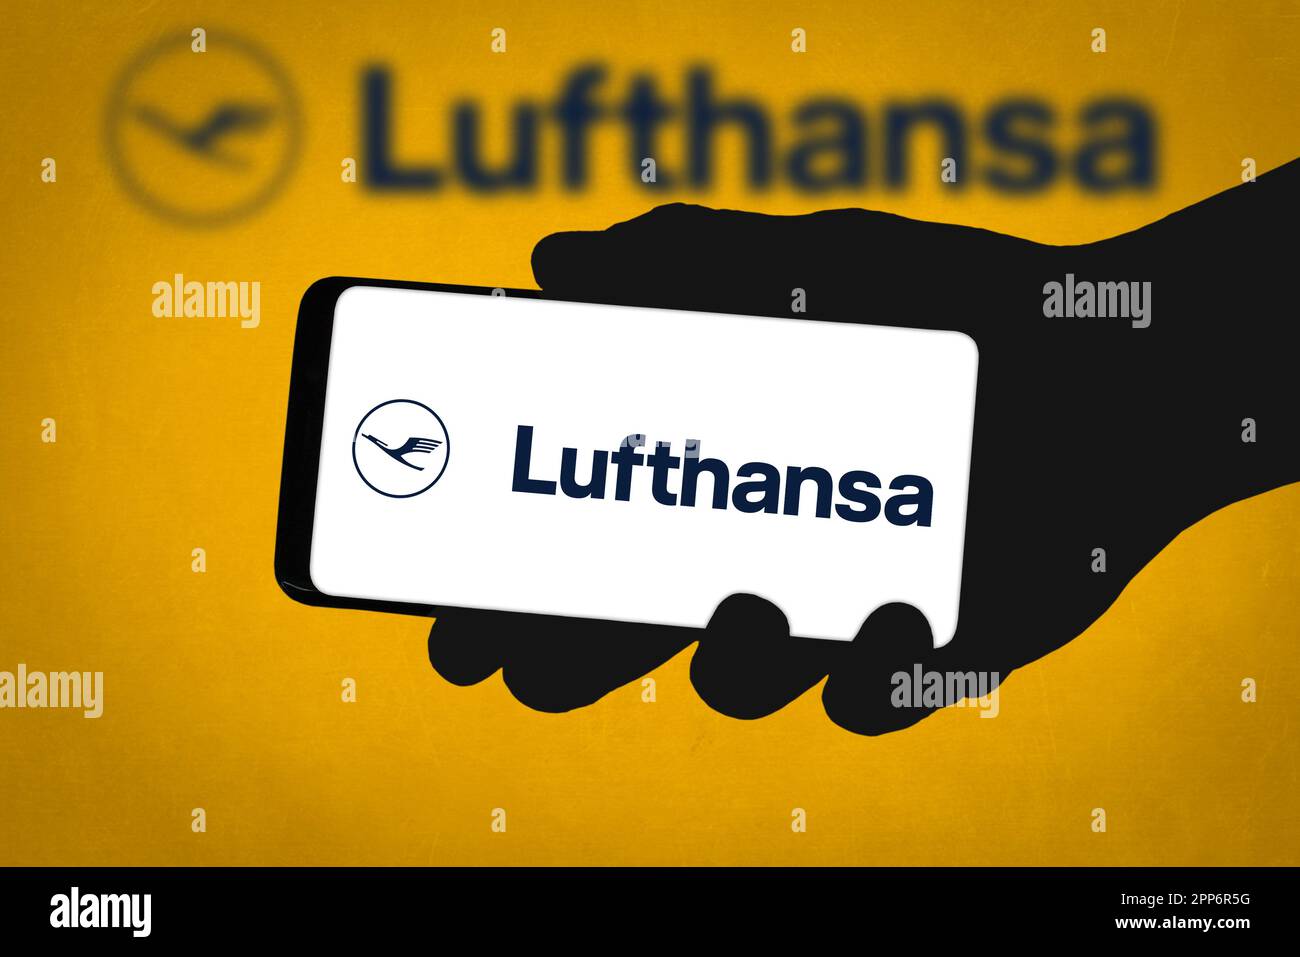 Lufthansa - flag carrier of Germany Stock Photo